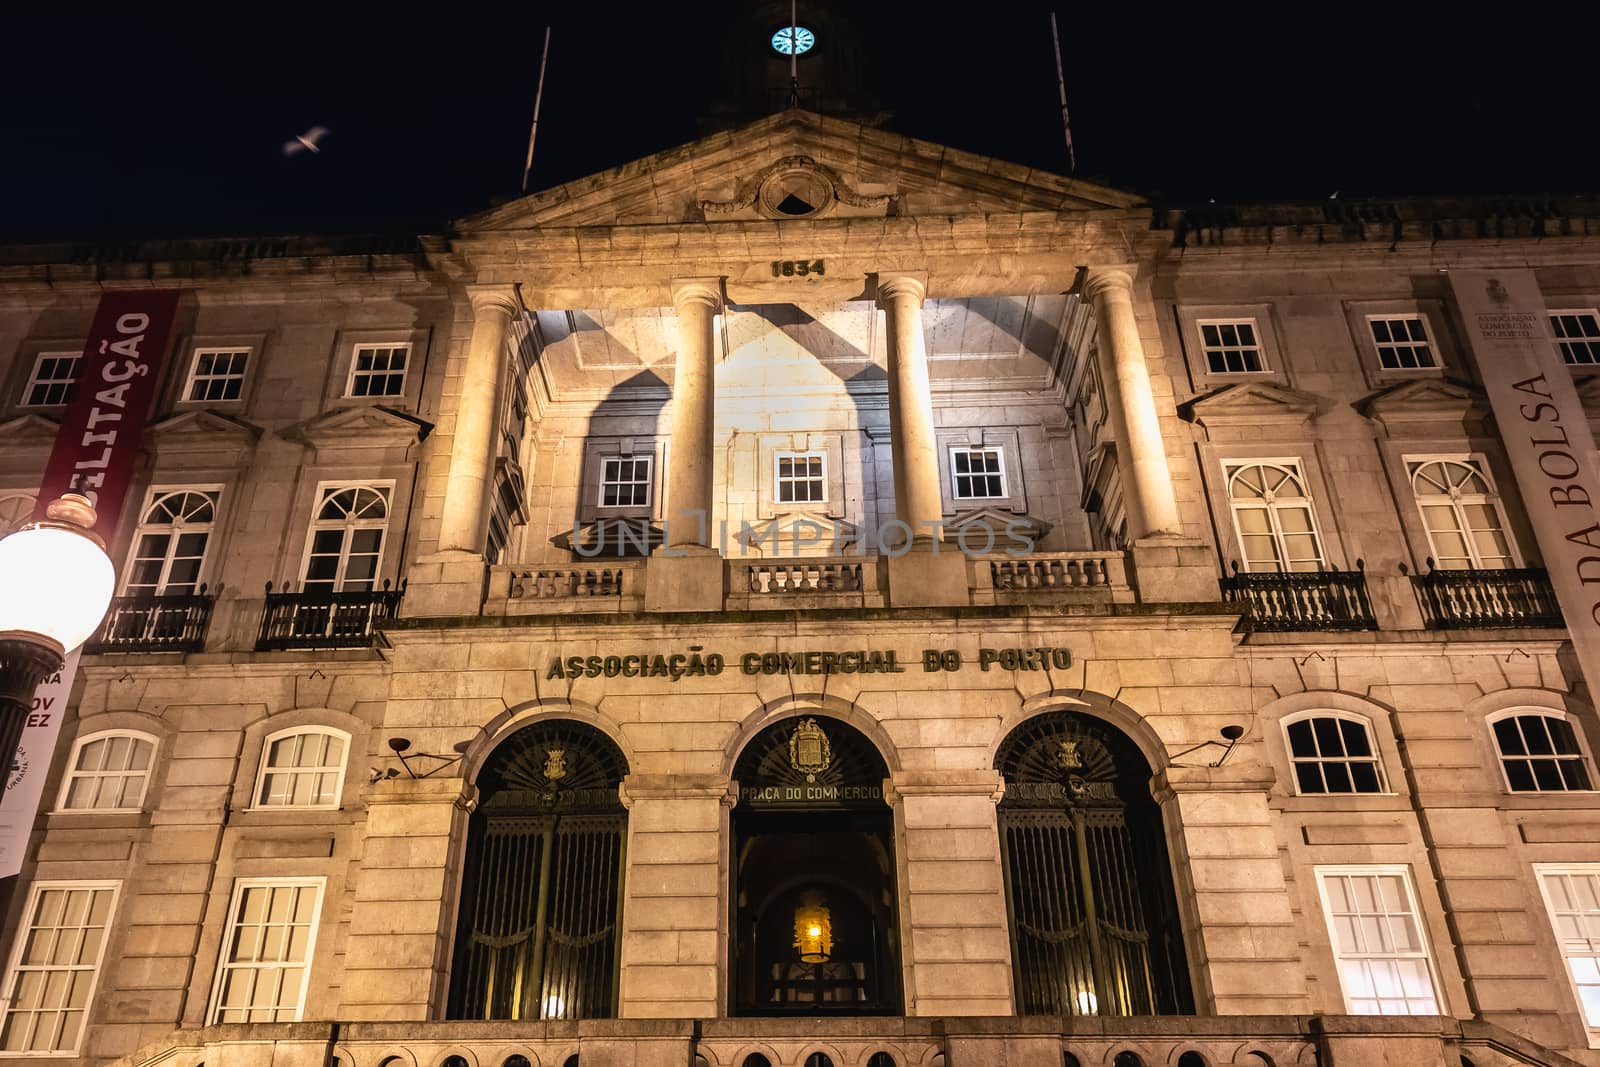 Porto, Portugal - November 30, 2018: Architecture detail of Porto commercial association at night one autumn day